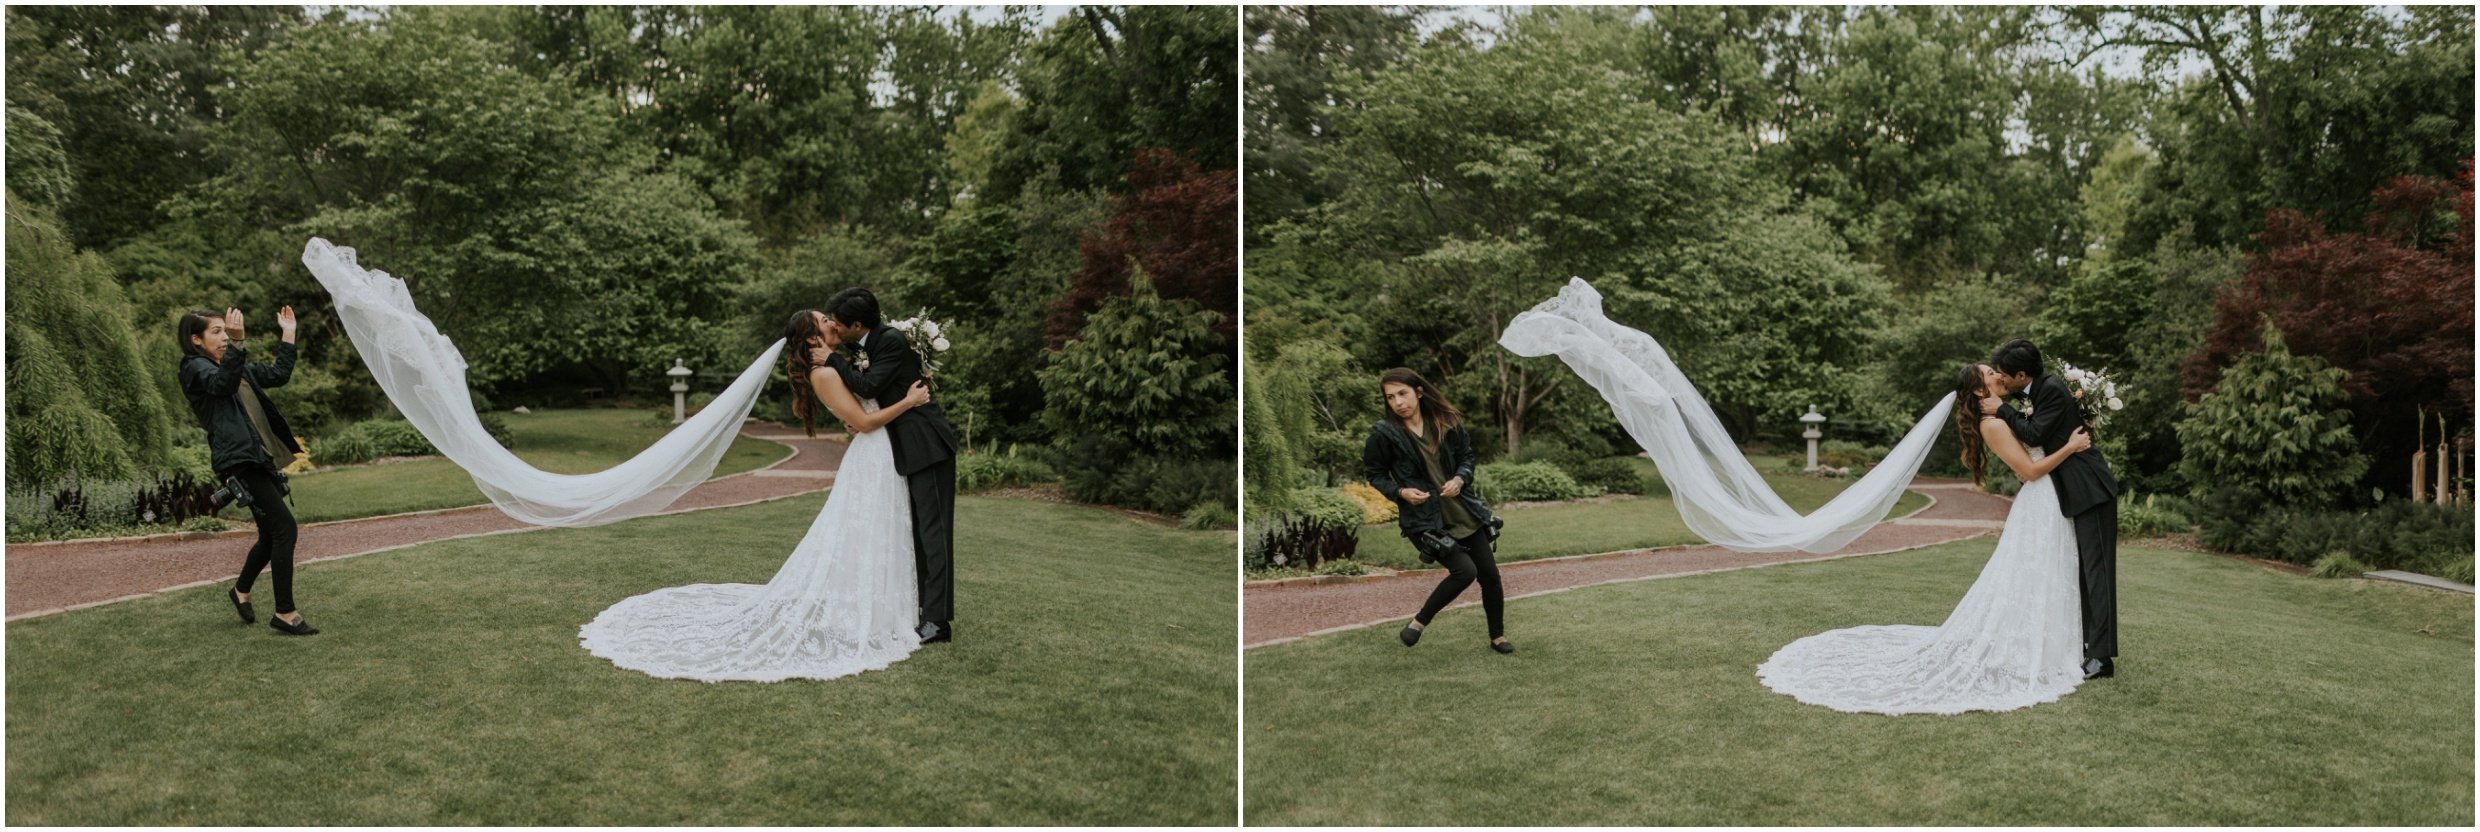 Casie was my amazing second shooter and she was fantastic at tossing Vania's veil for shots!